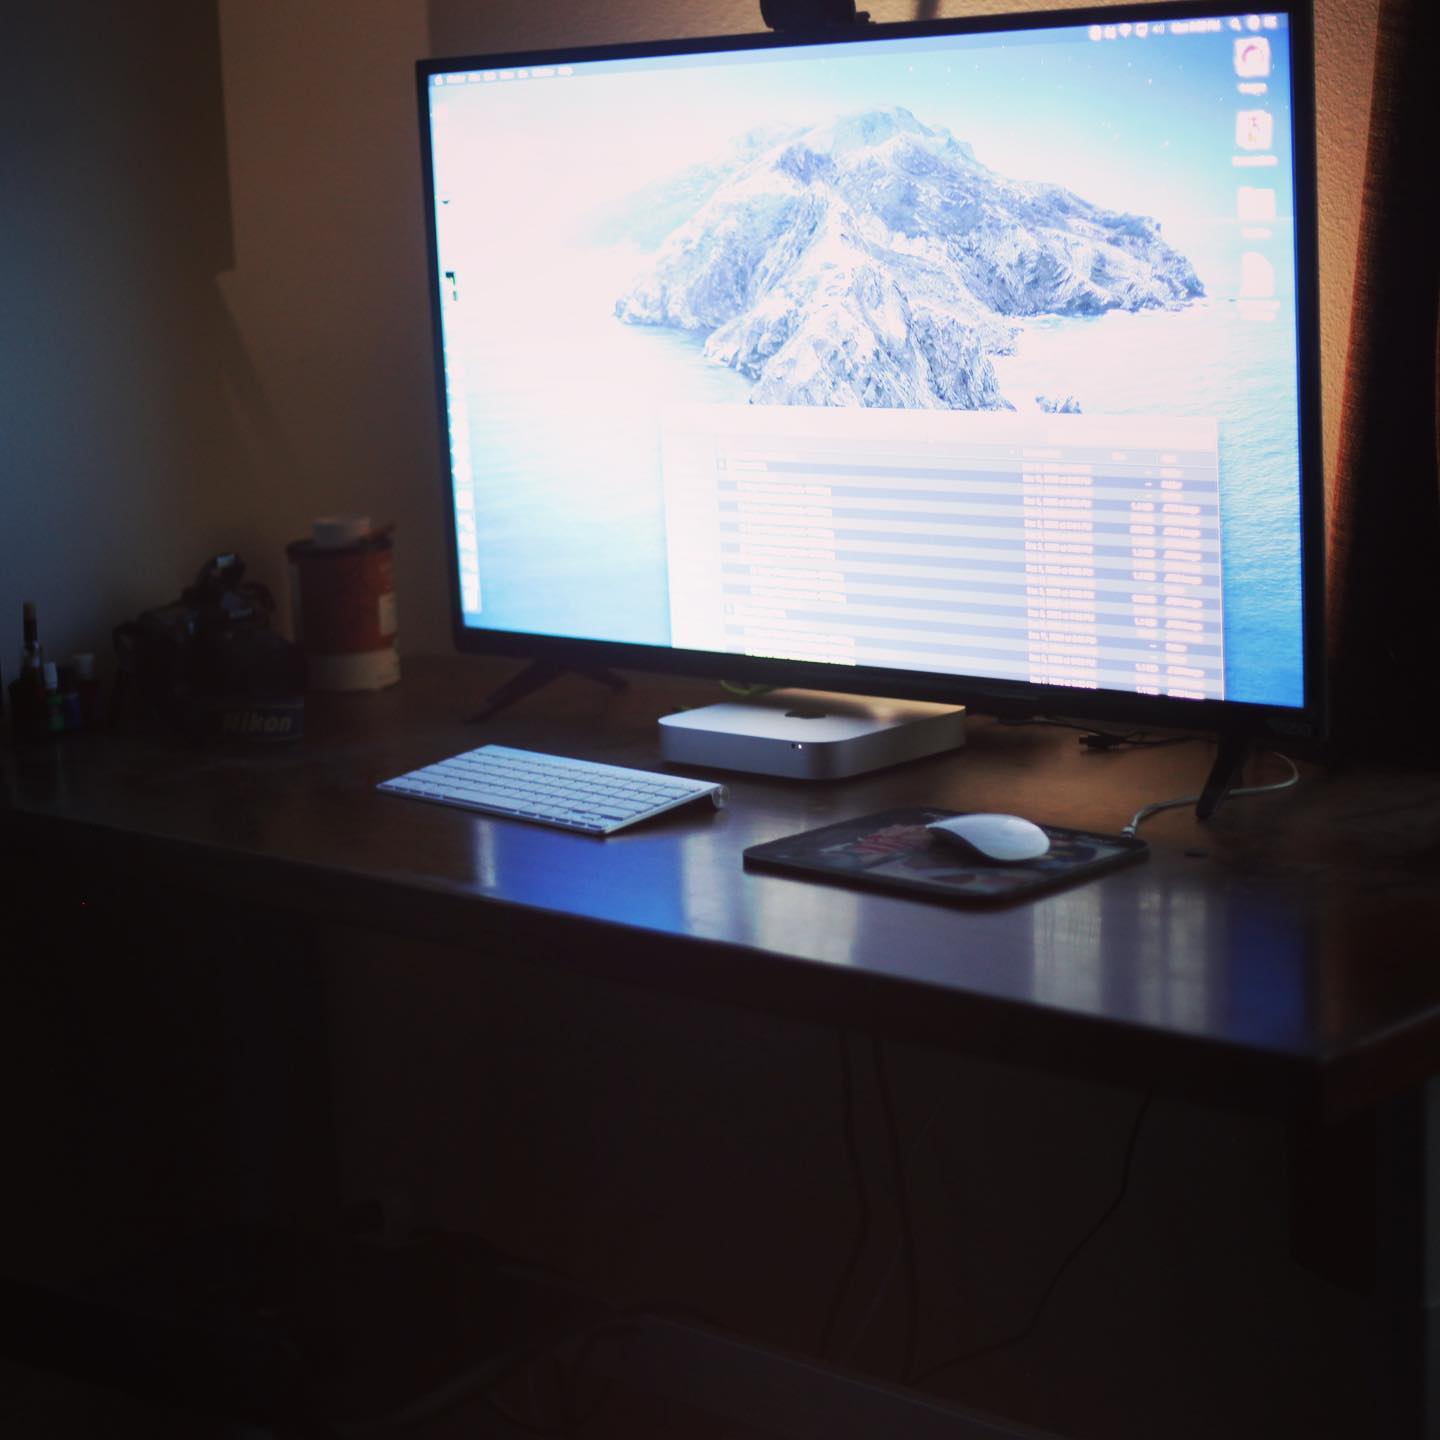 This is my editing standing desk with a large ultra sharp display powered by a Mac Mini.